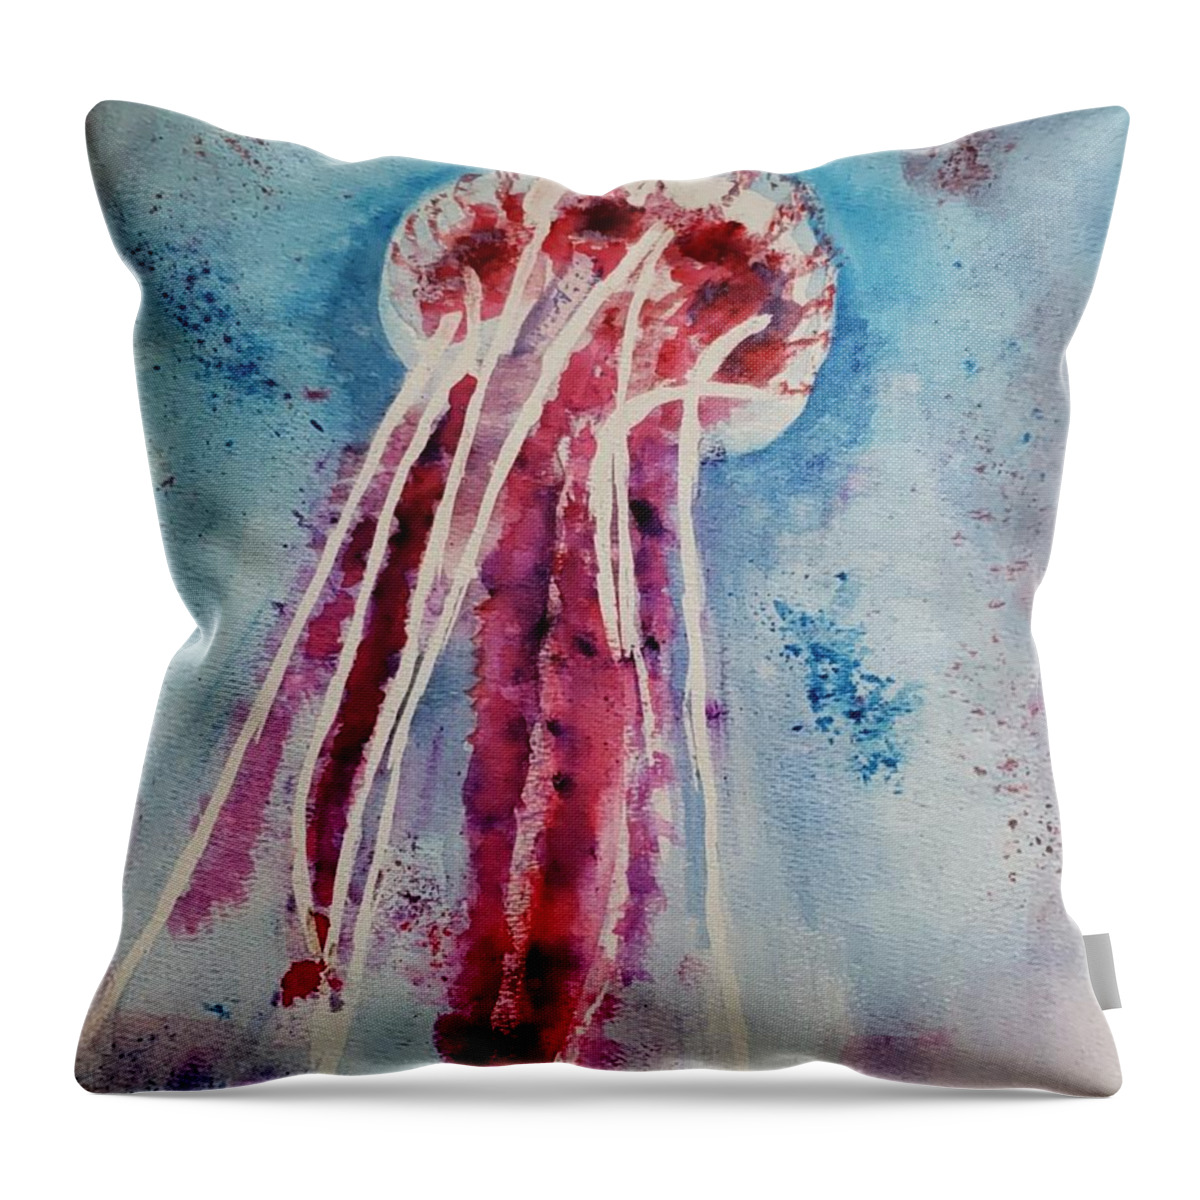 Abstract Aquatic Throw Pillow featuring the painting Giant Jellyfish Floating Along by Stacie Siemsen